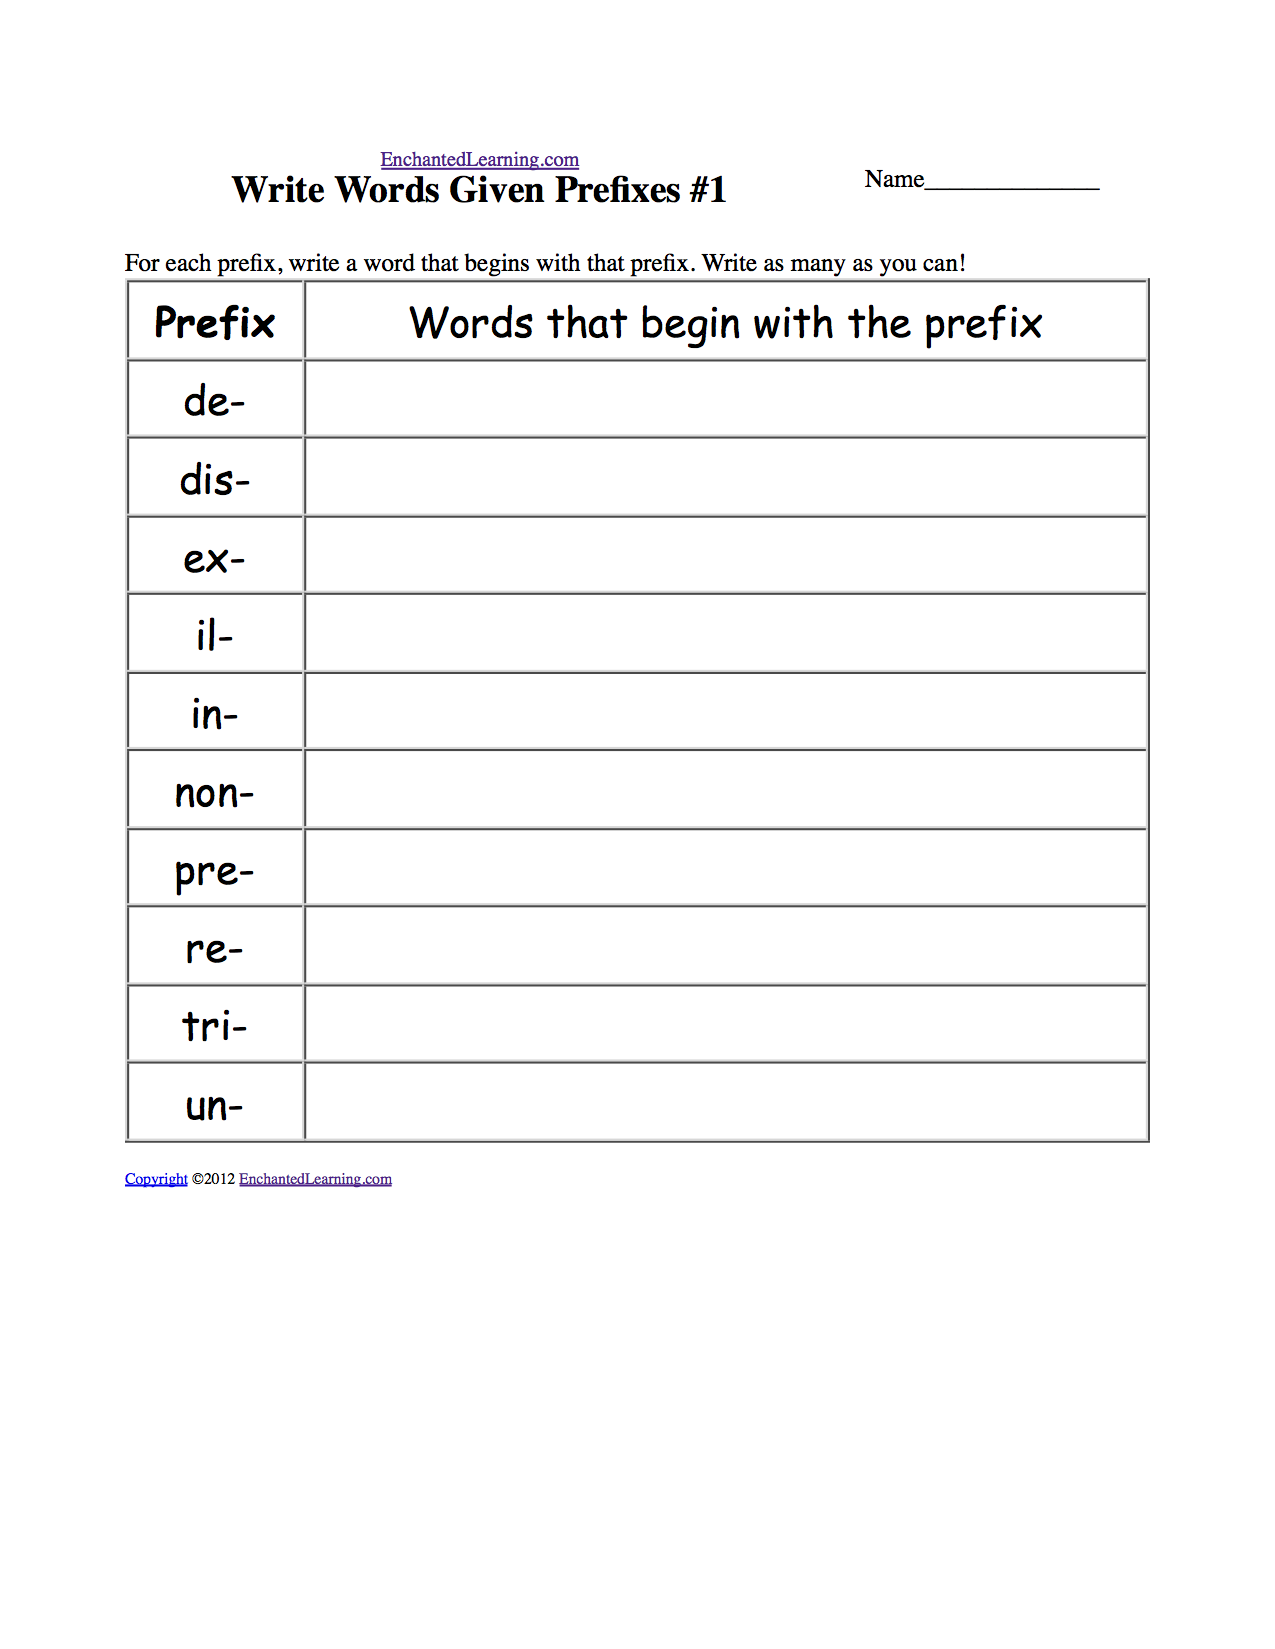 Worksheets and Activities - Prefixes and Suffixes: EnchantedLearning.com